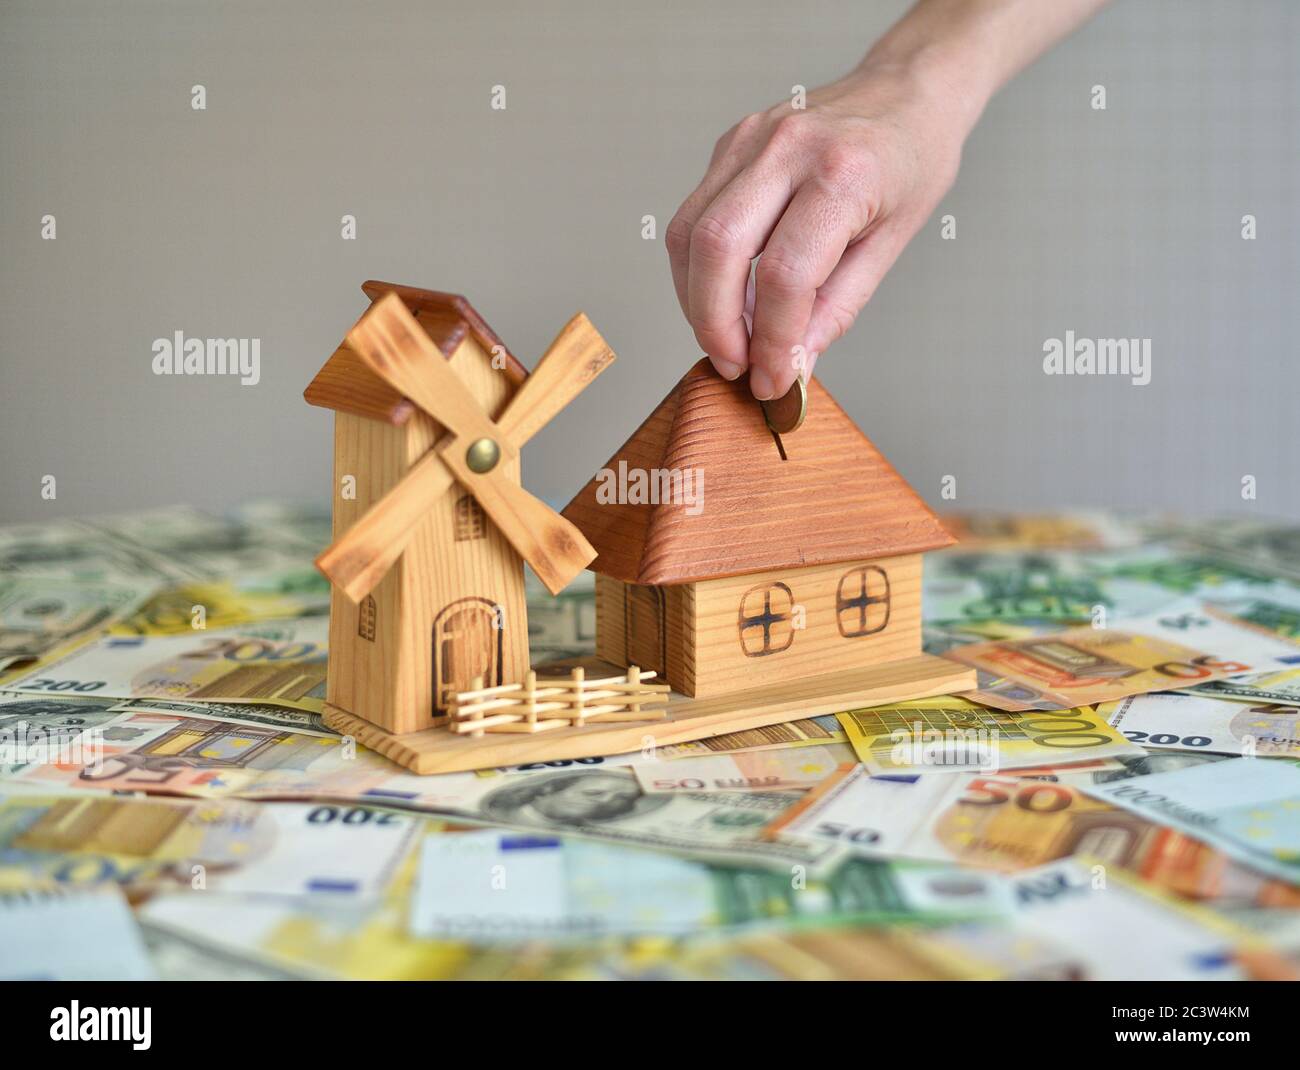 Hand Putting Coin In money box Stock Photo